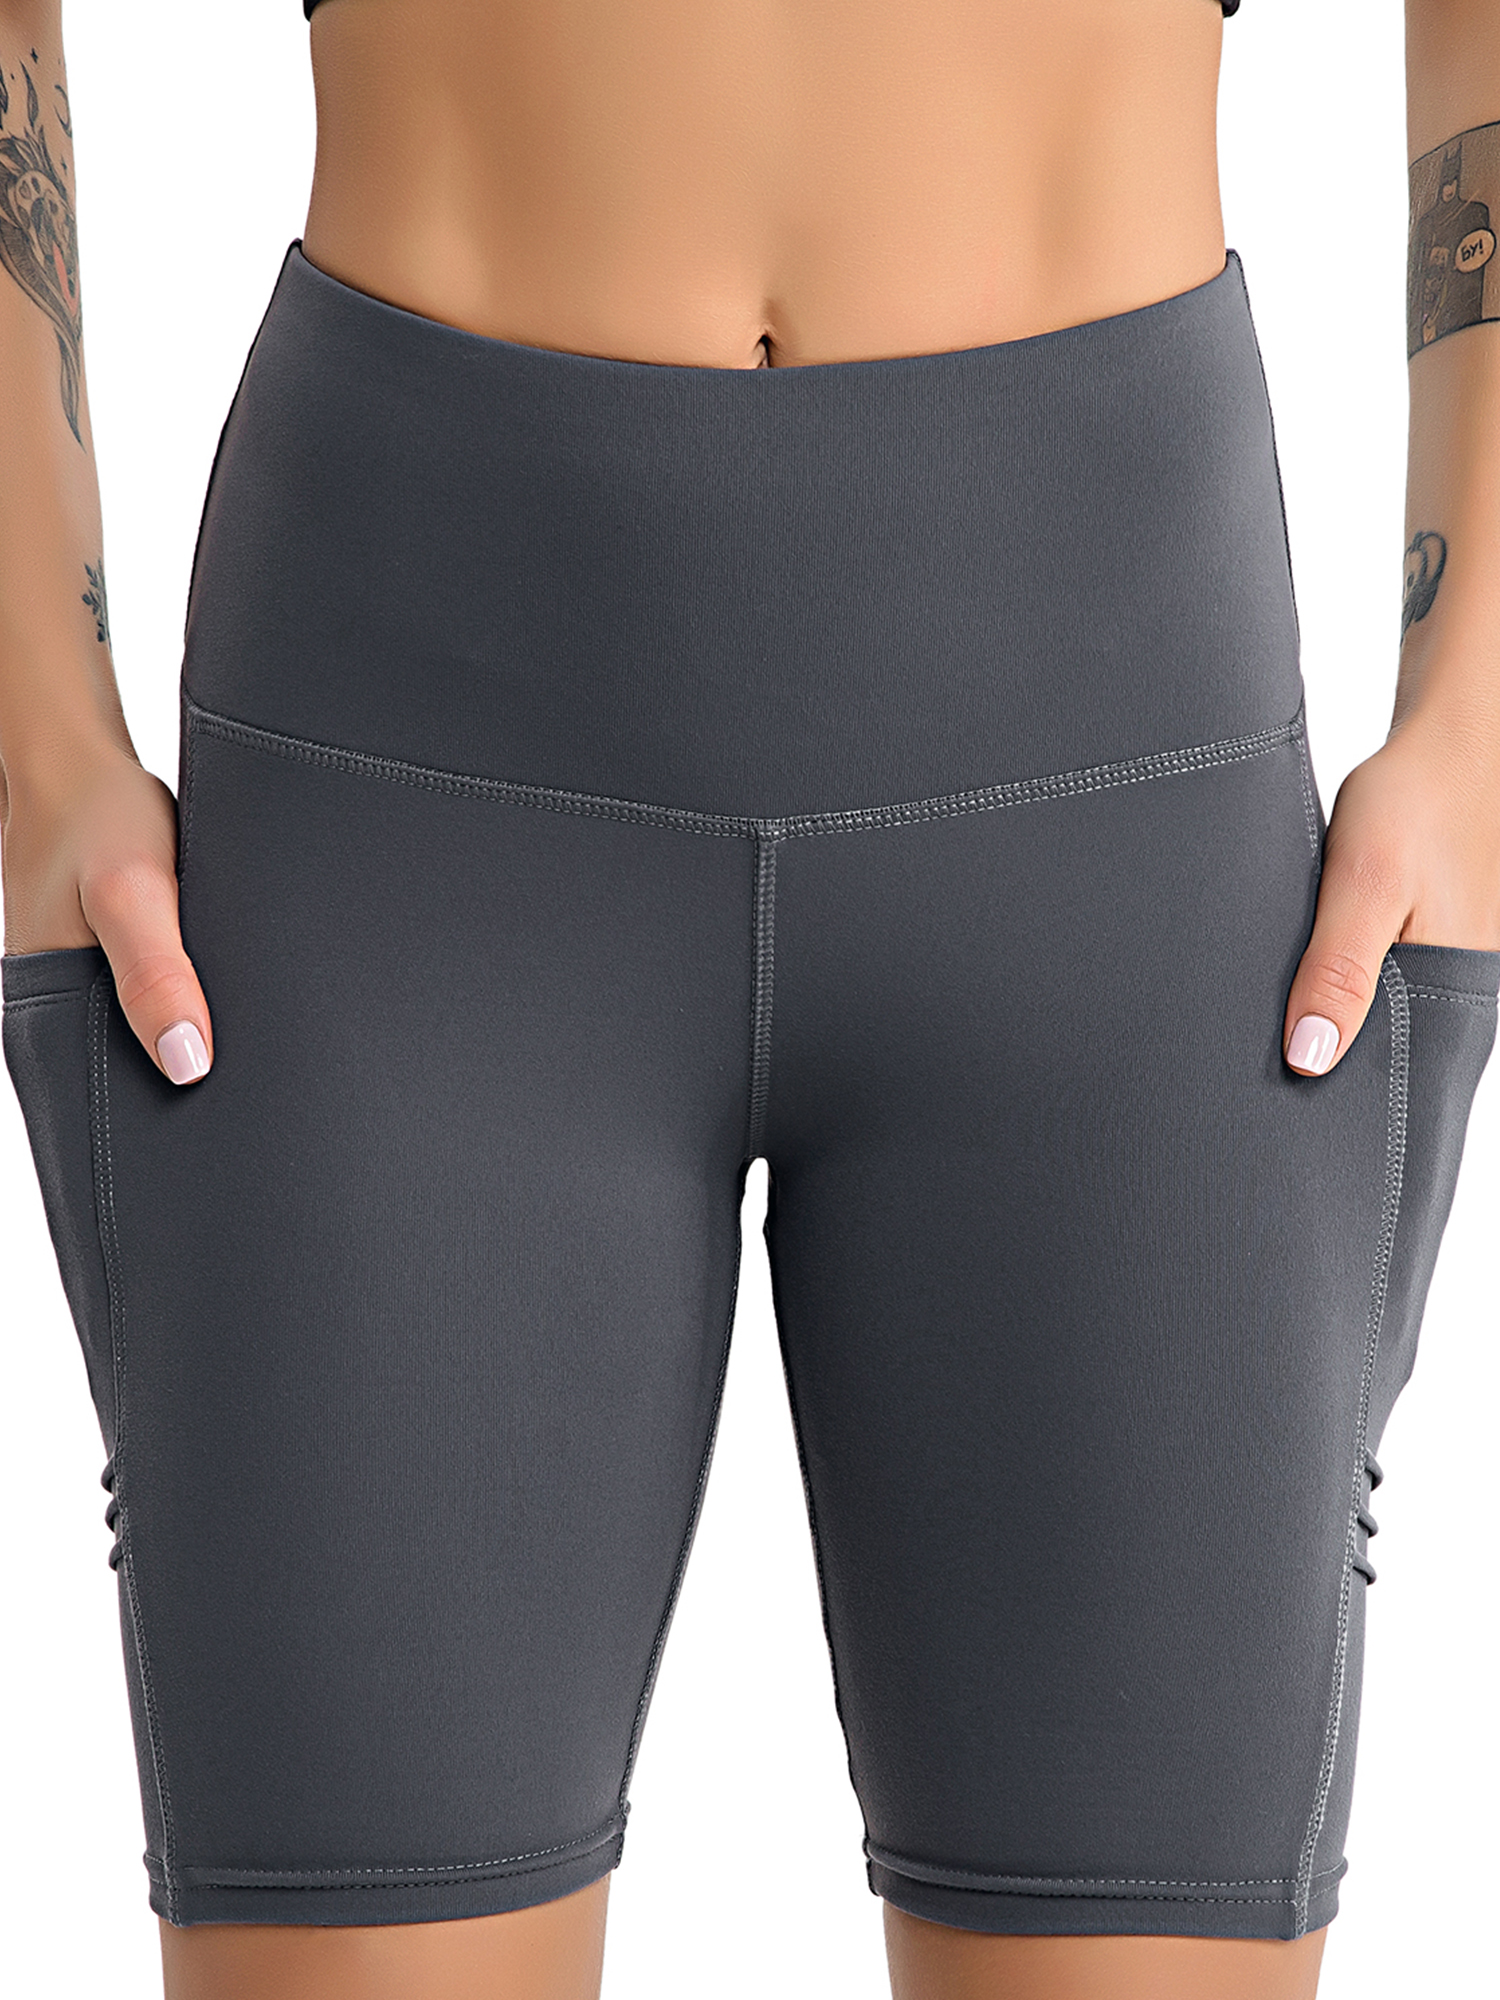 Whear Womens High Waist Workout Yoga Shorts Leggings with 2 Pockets,Non See-Through Tummy Control Athletic Shorts